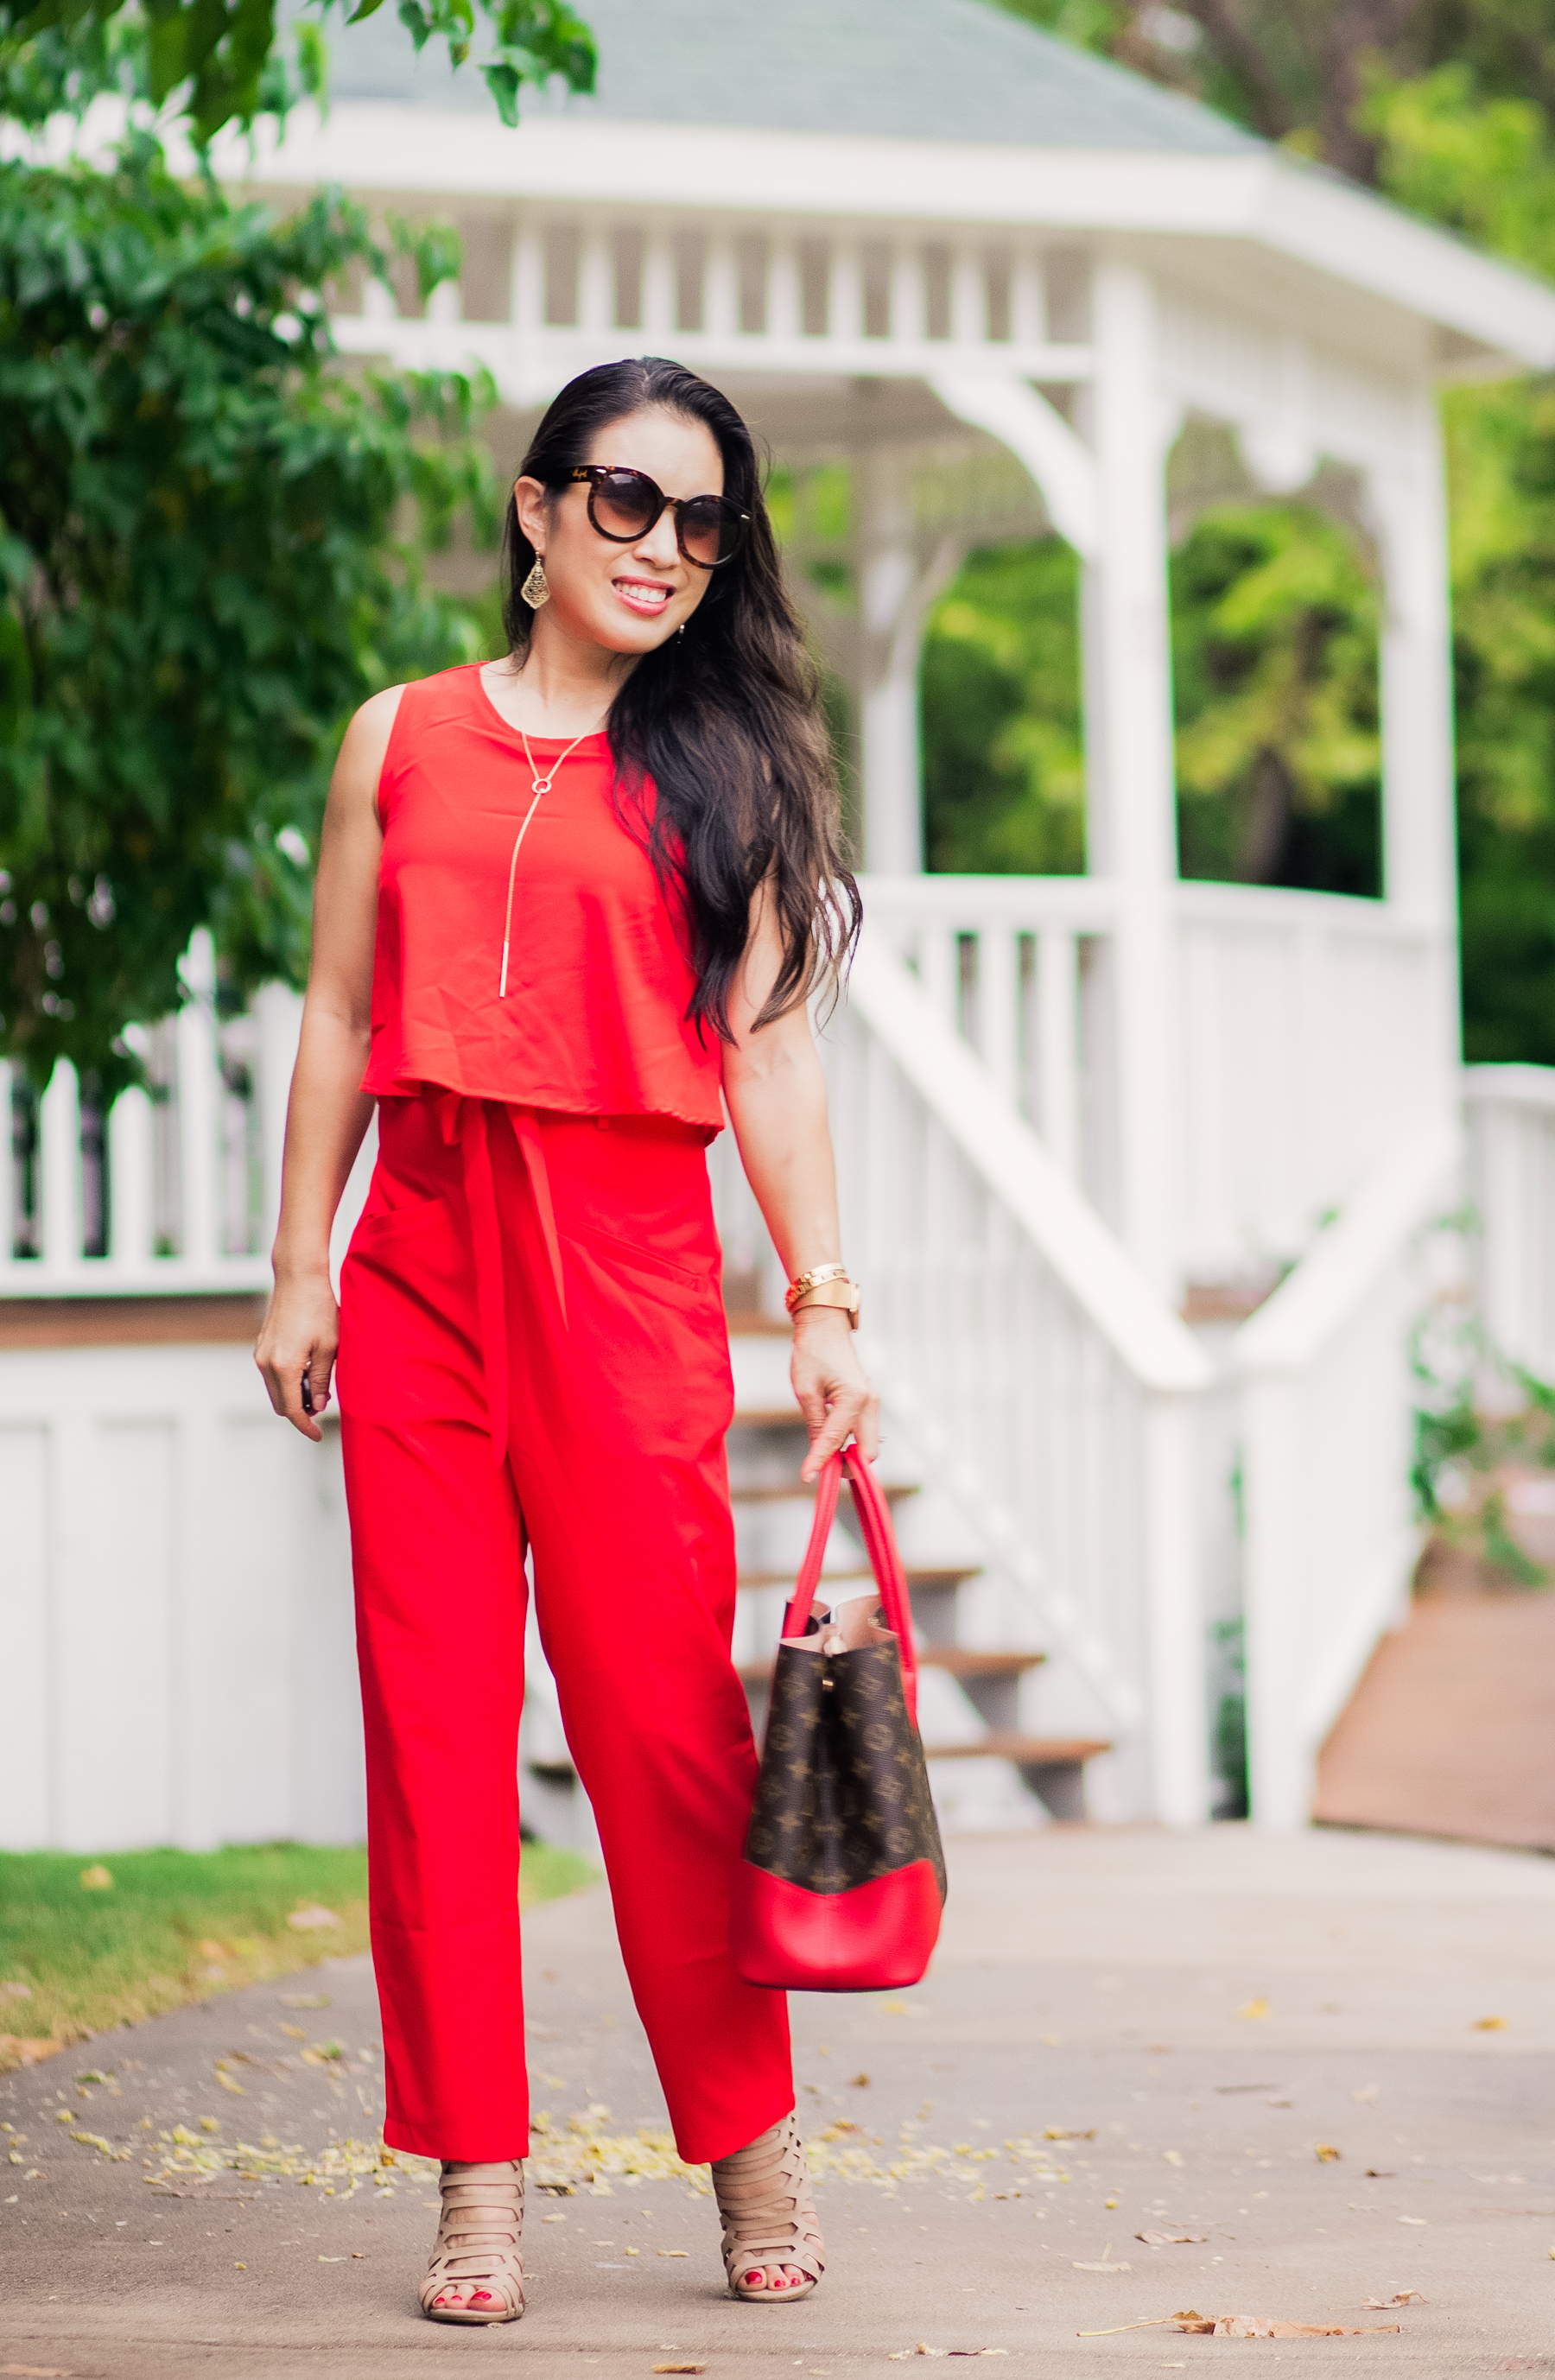 Louis Vuitton 2020 Jumpsuit - Red, 10.5 Rise Jumpsuits and